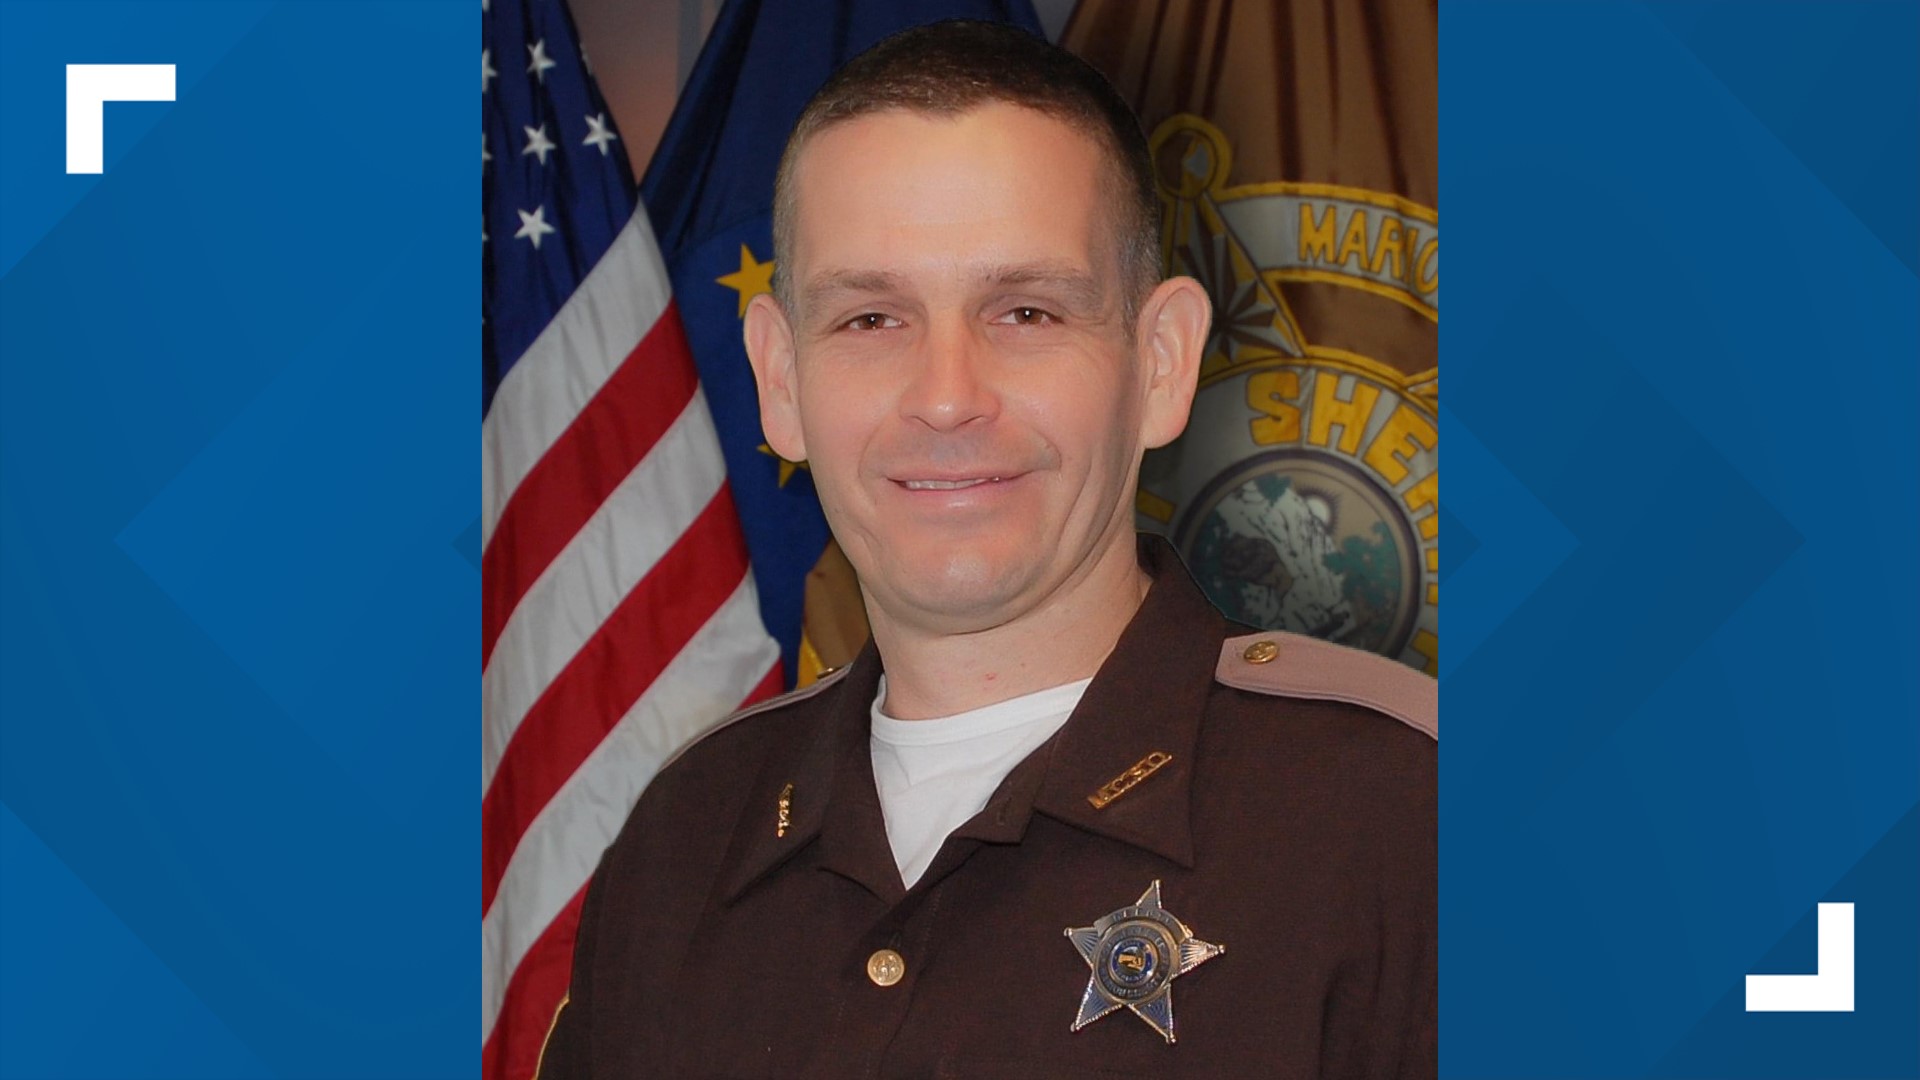 Lieutenant Jason Lee is a reserve deputy with the Marion County Sheriff's Office.